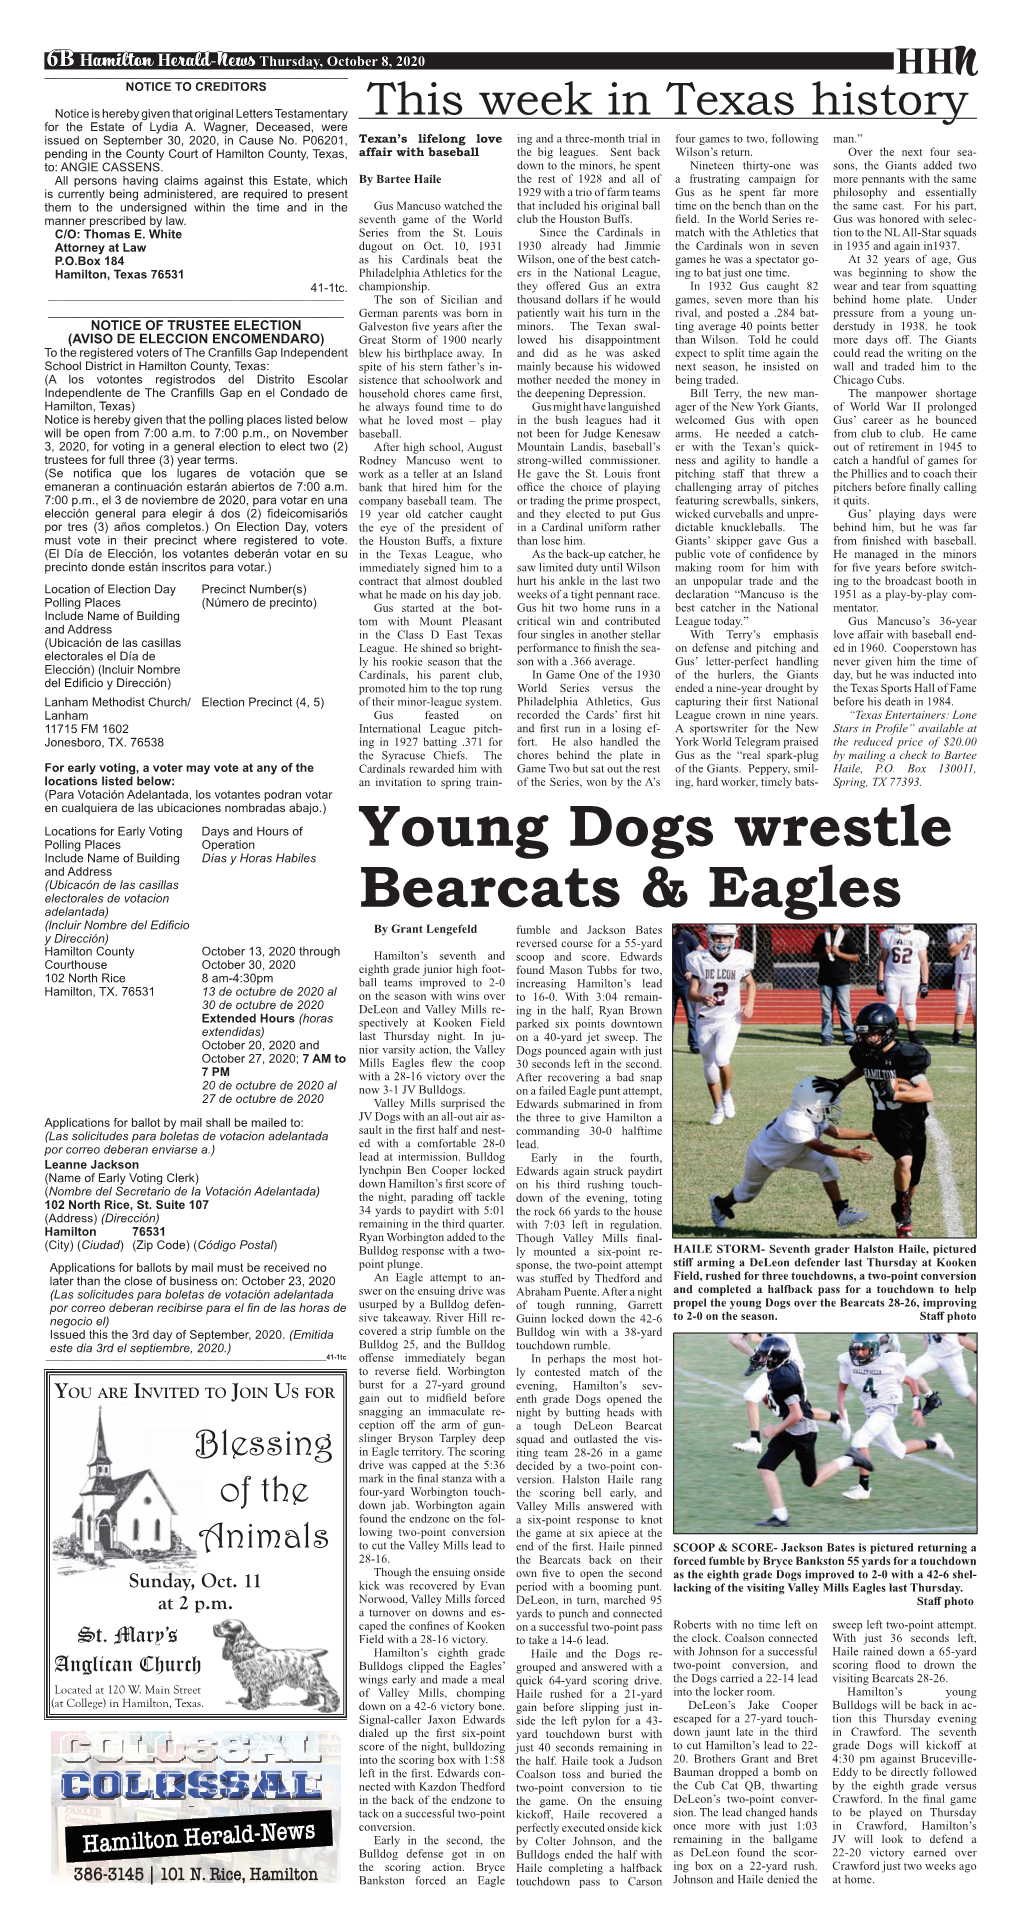 Young Dogs Wrestle Bearcats & Eagles